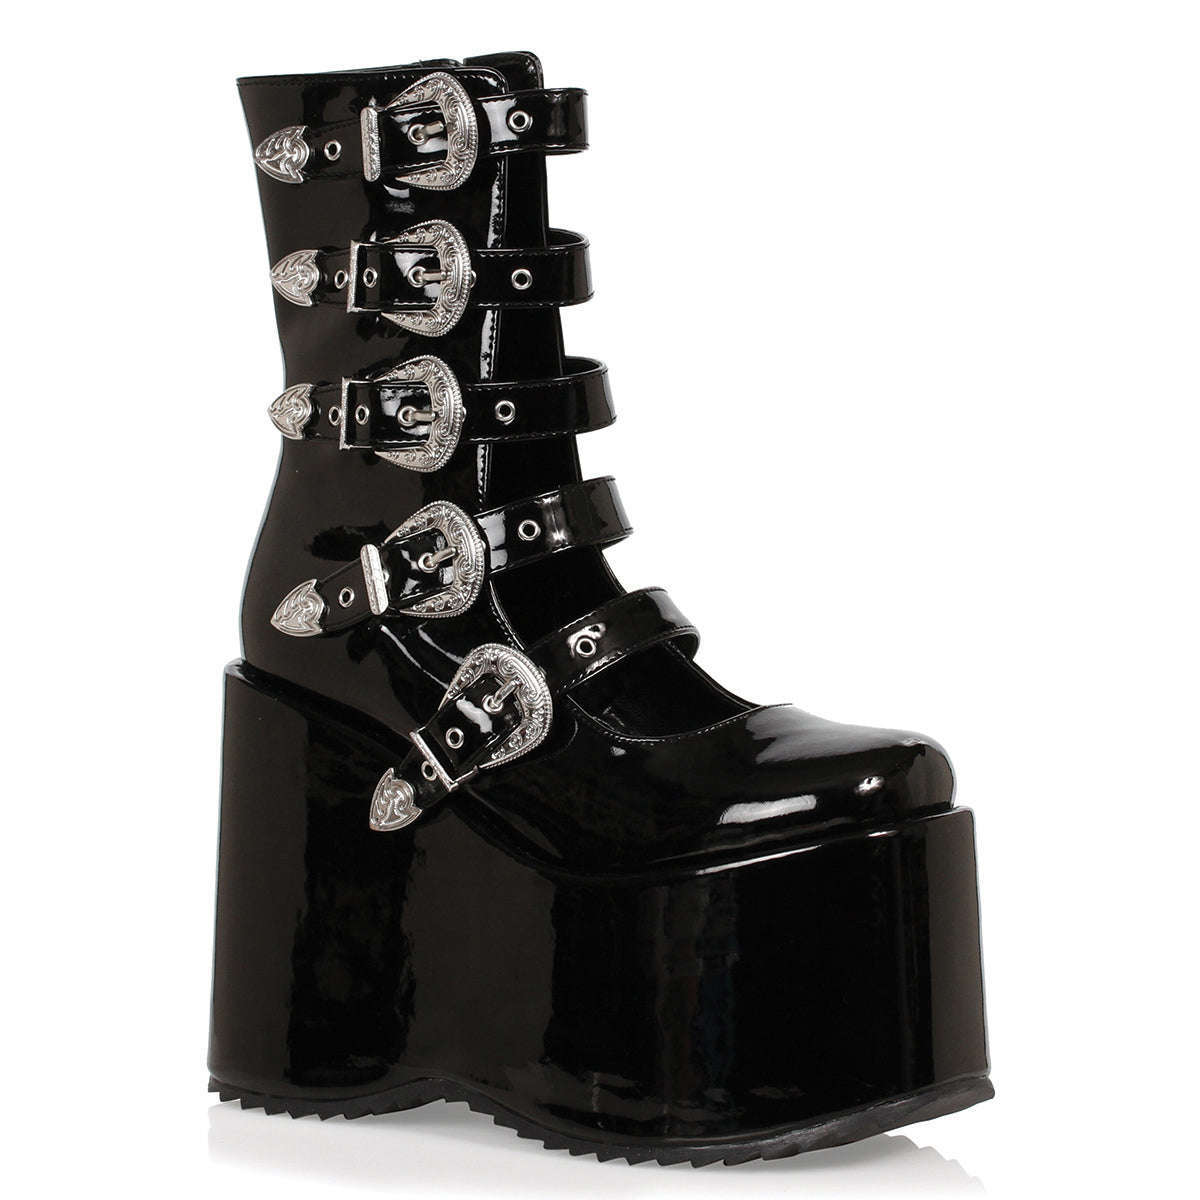 5" Gothic Glamour Chunky Women's Platform Buckle Boots